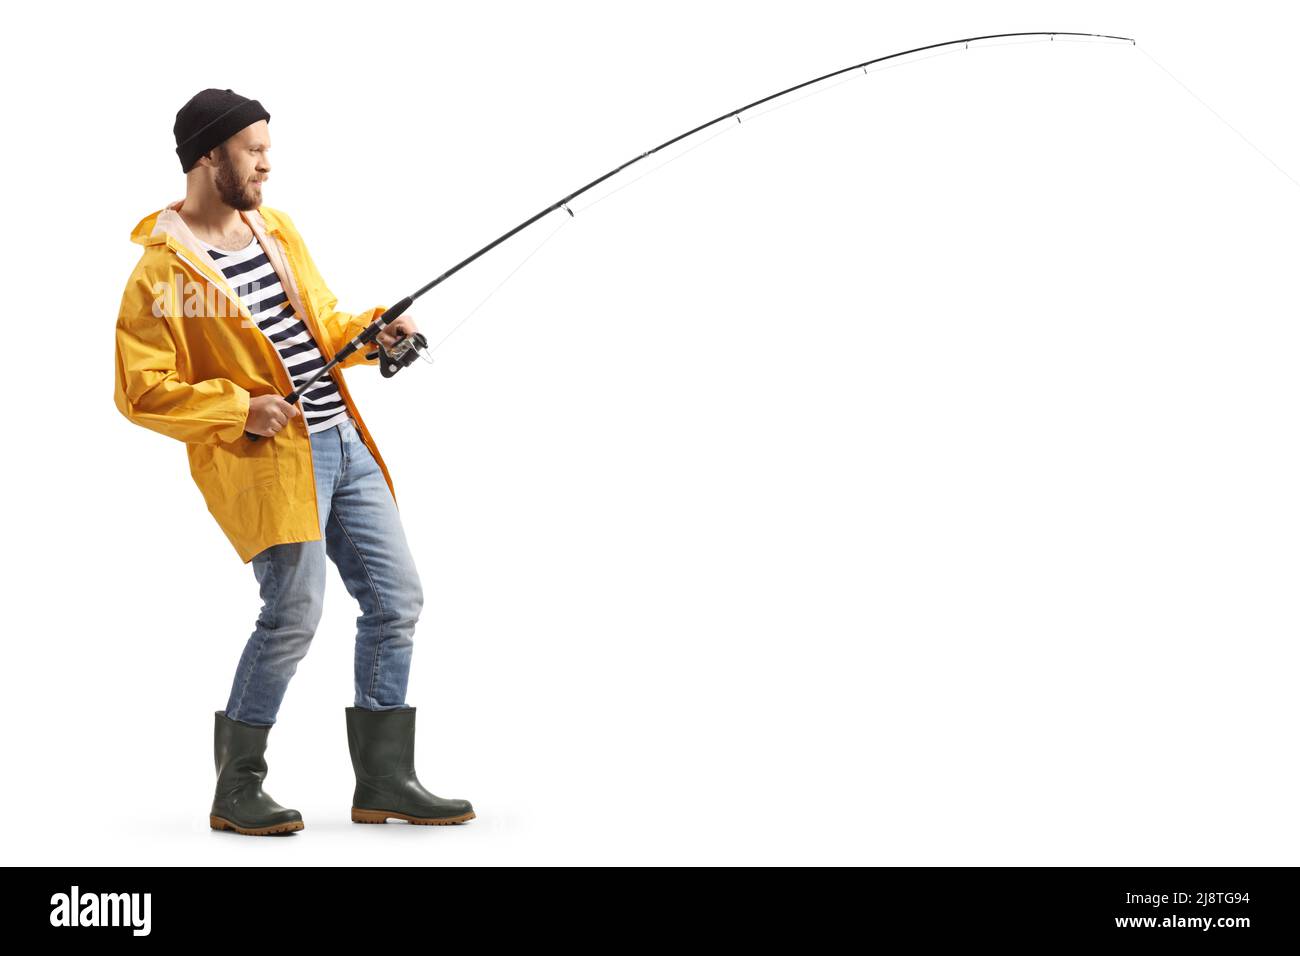 Man fishing Cut Out Stock Images & Pictures - Page 3 - Alamy